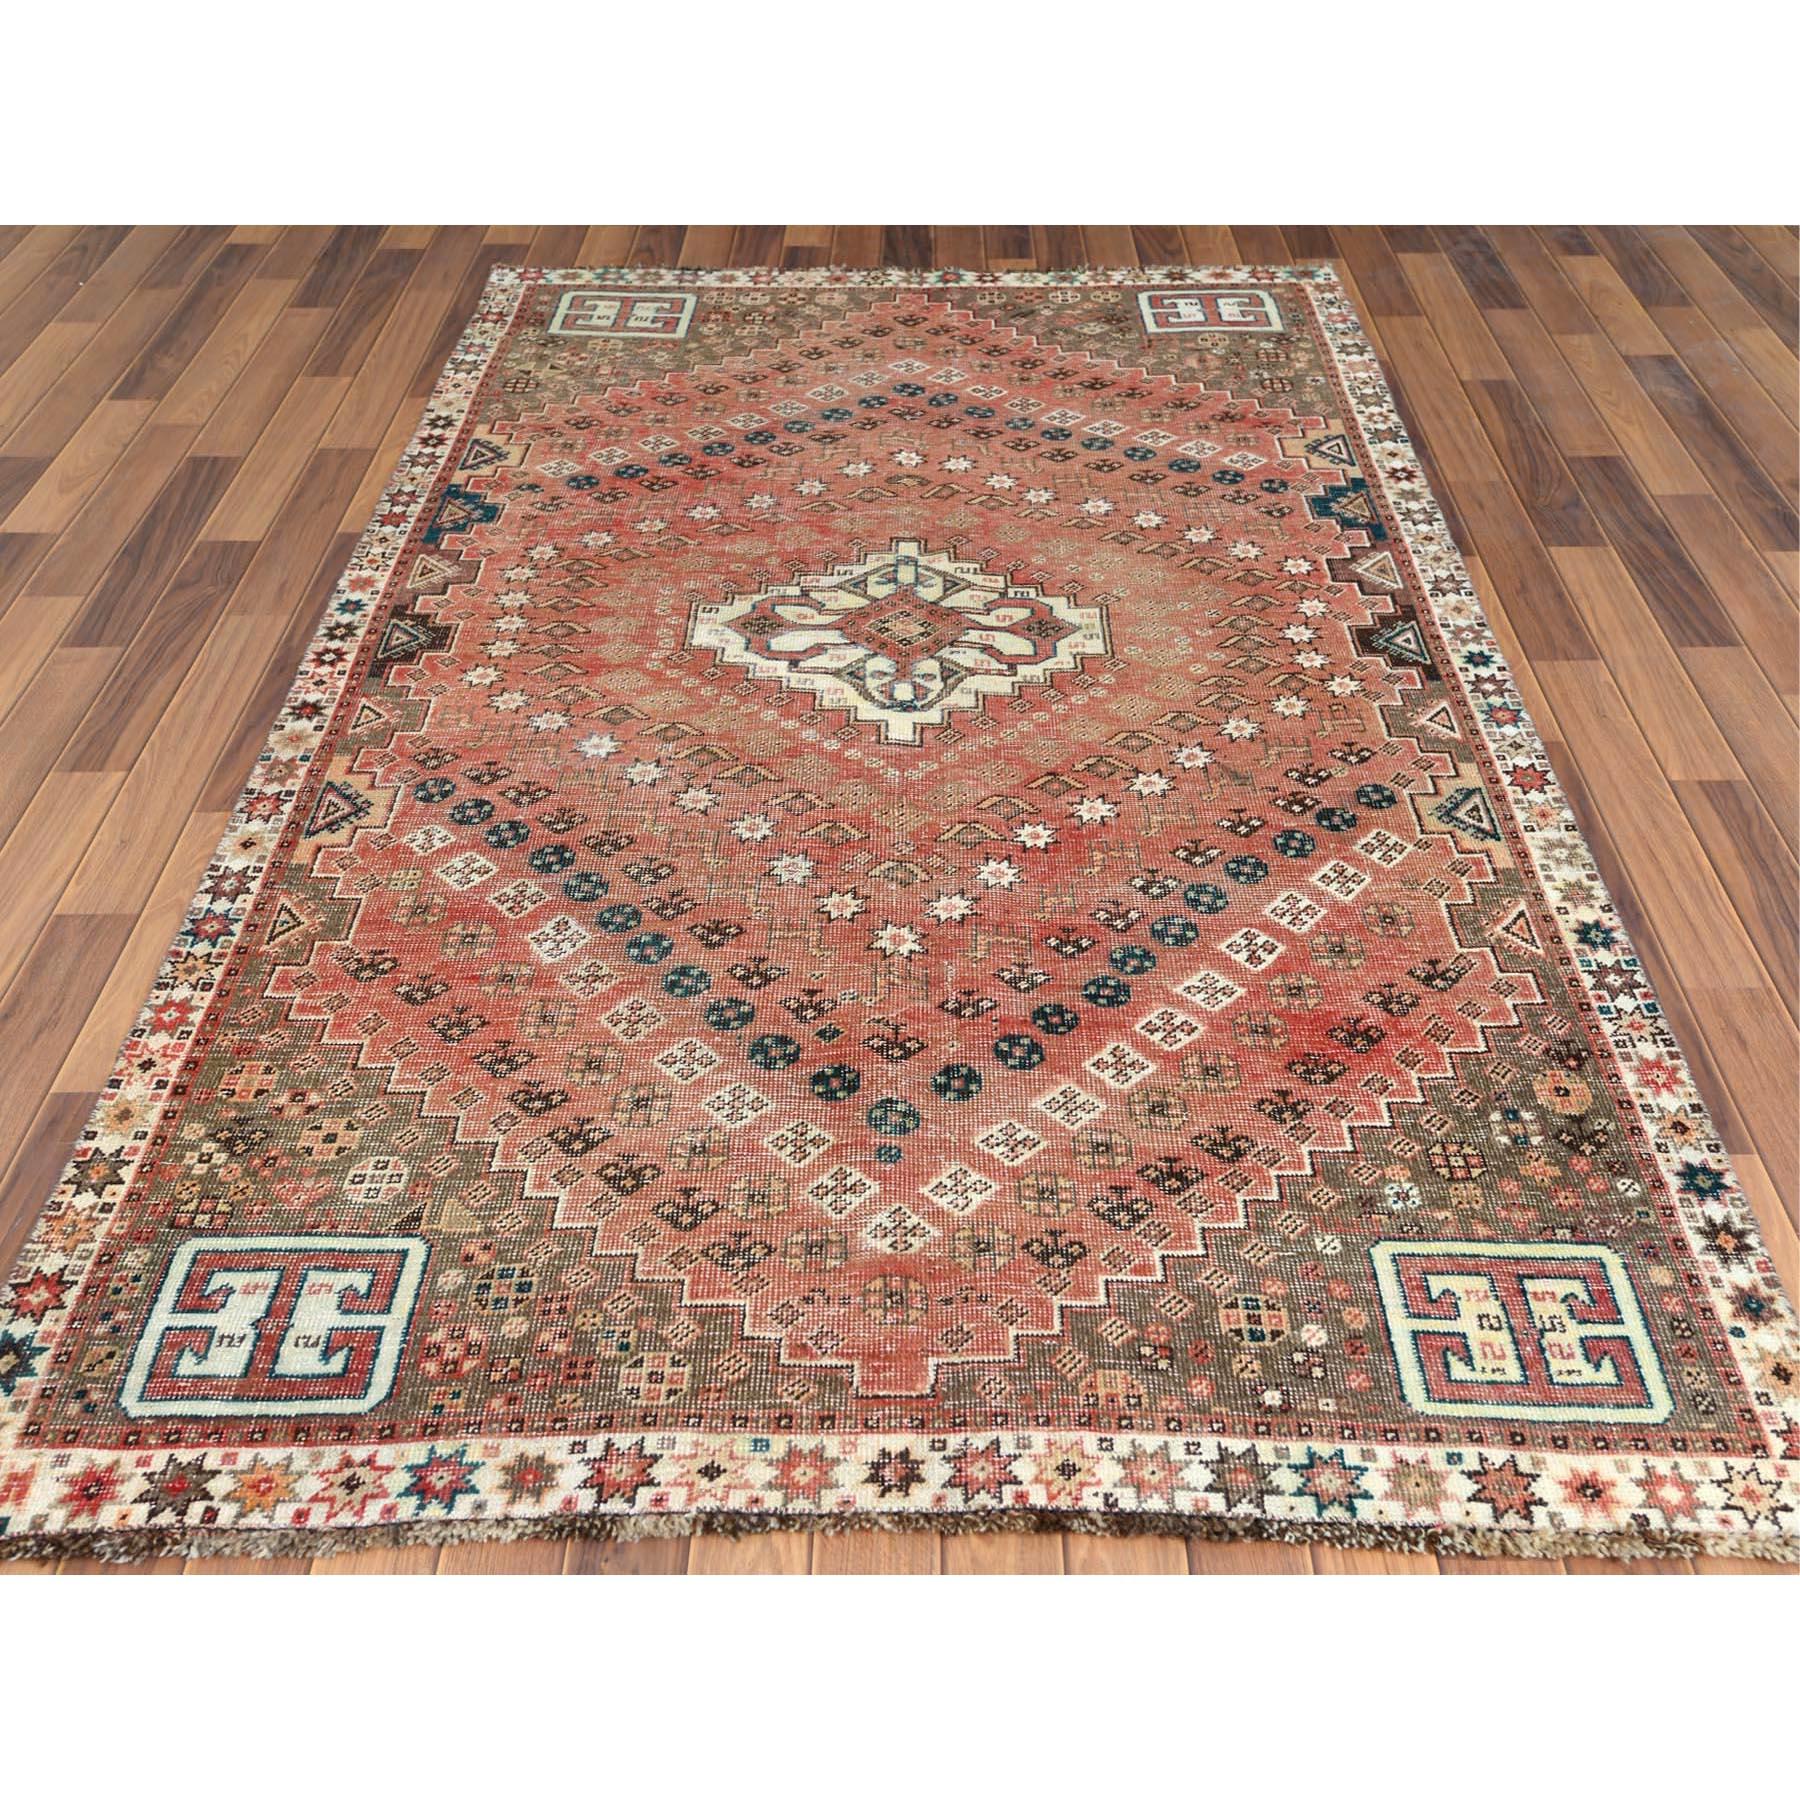 This fabulous hand knotted carpet has been created and designed for extra strength and durability. This rug has been handcrafted for weeks in the traditional method that is used to make rugs. This is truly a one of kind piece. 

Exact rug size in